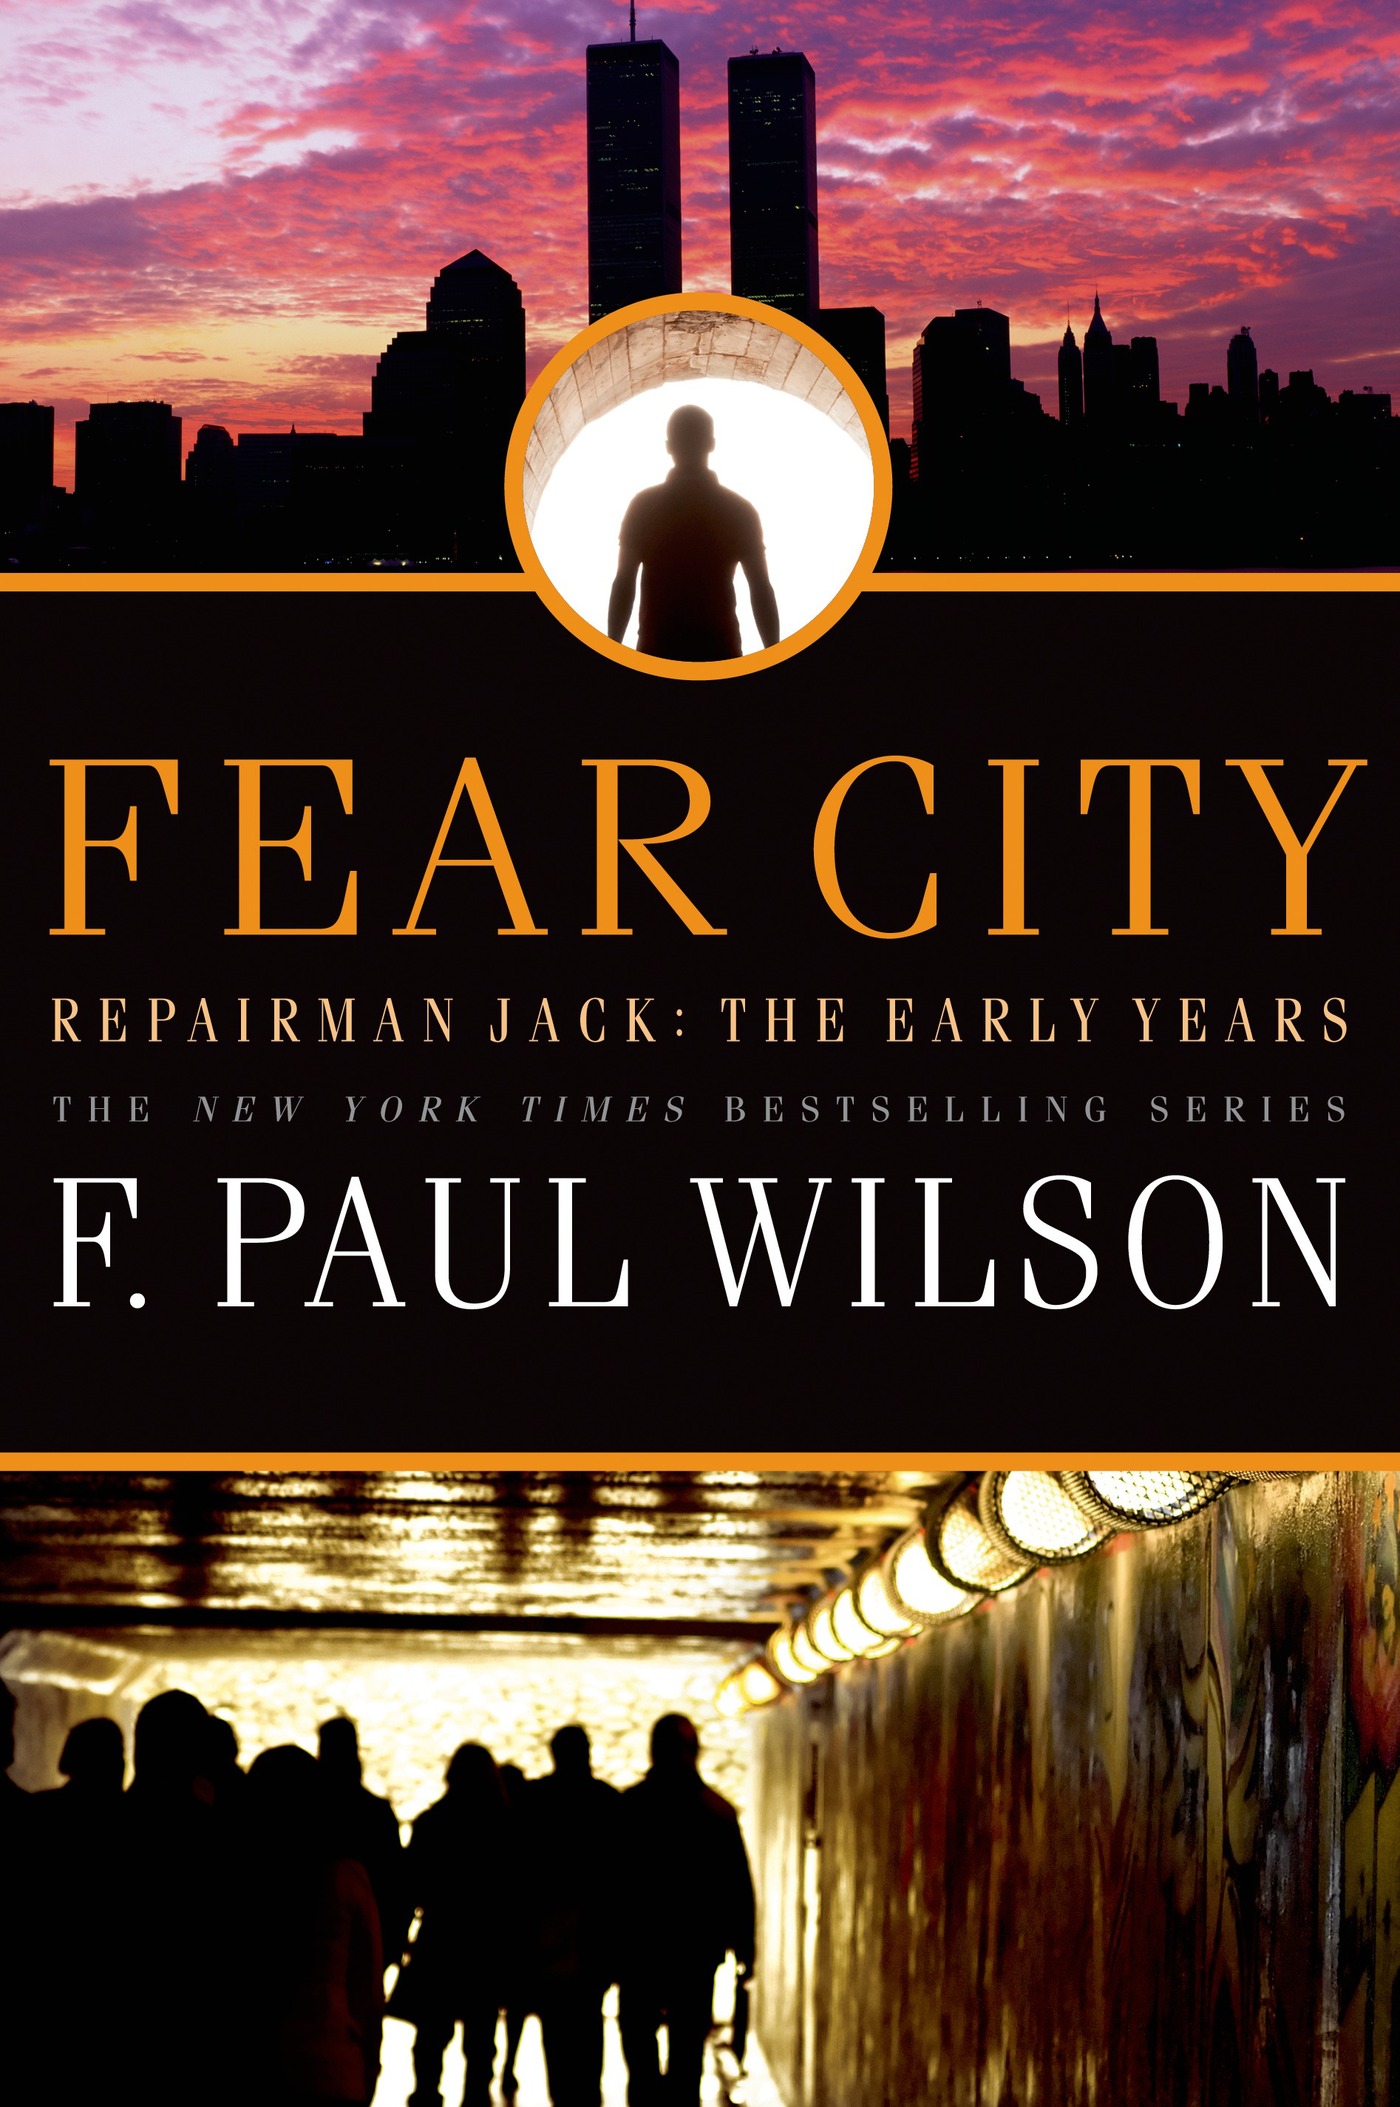 Fear City : Repairman Jack: The Early Years by F. Paul Wilson